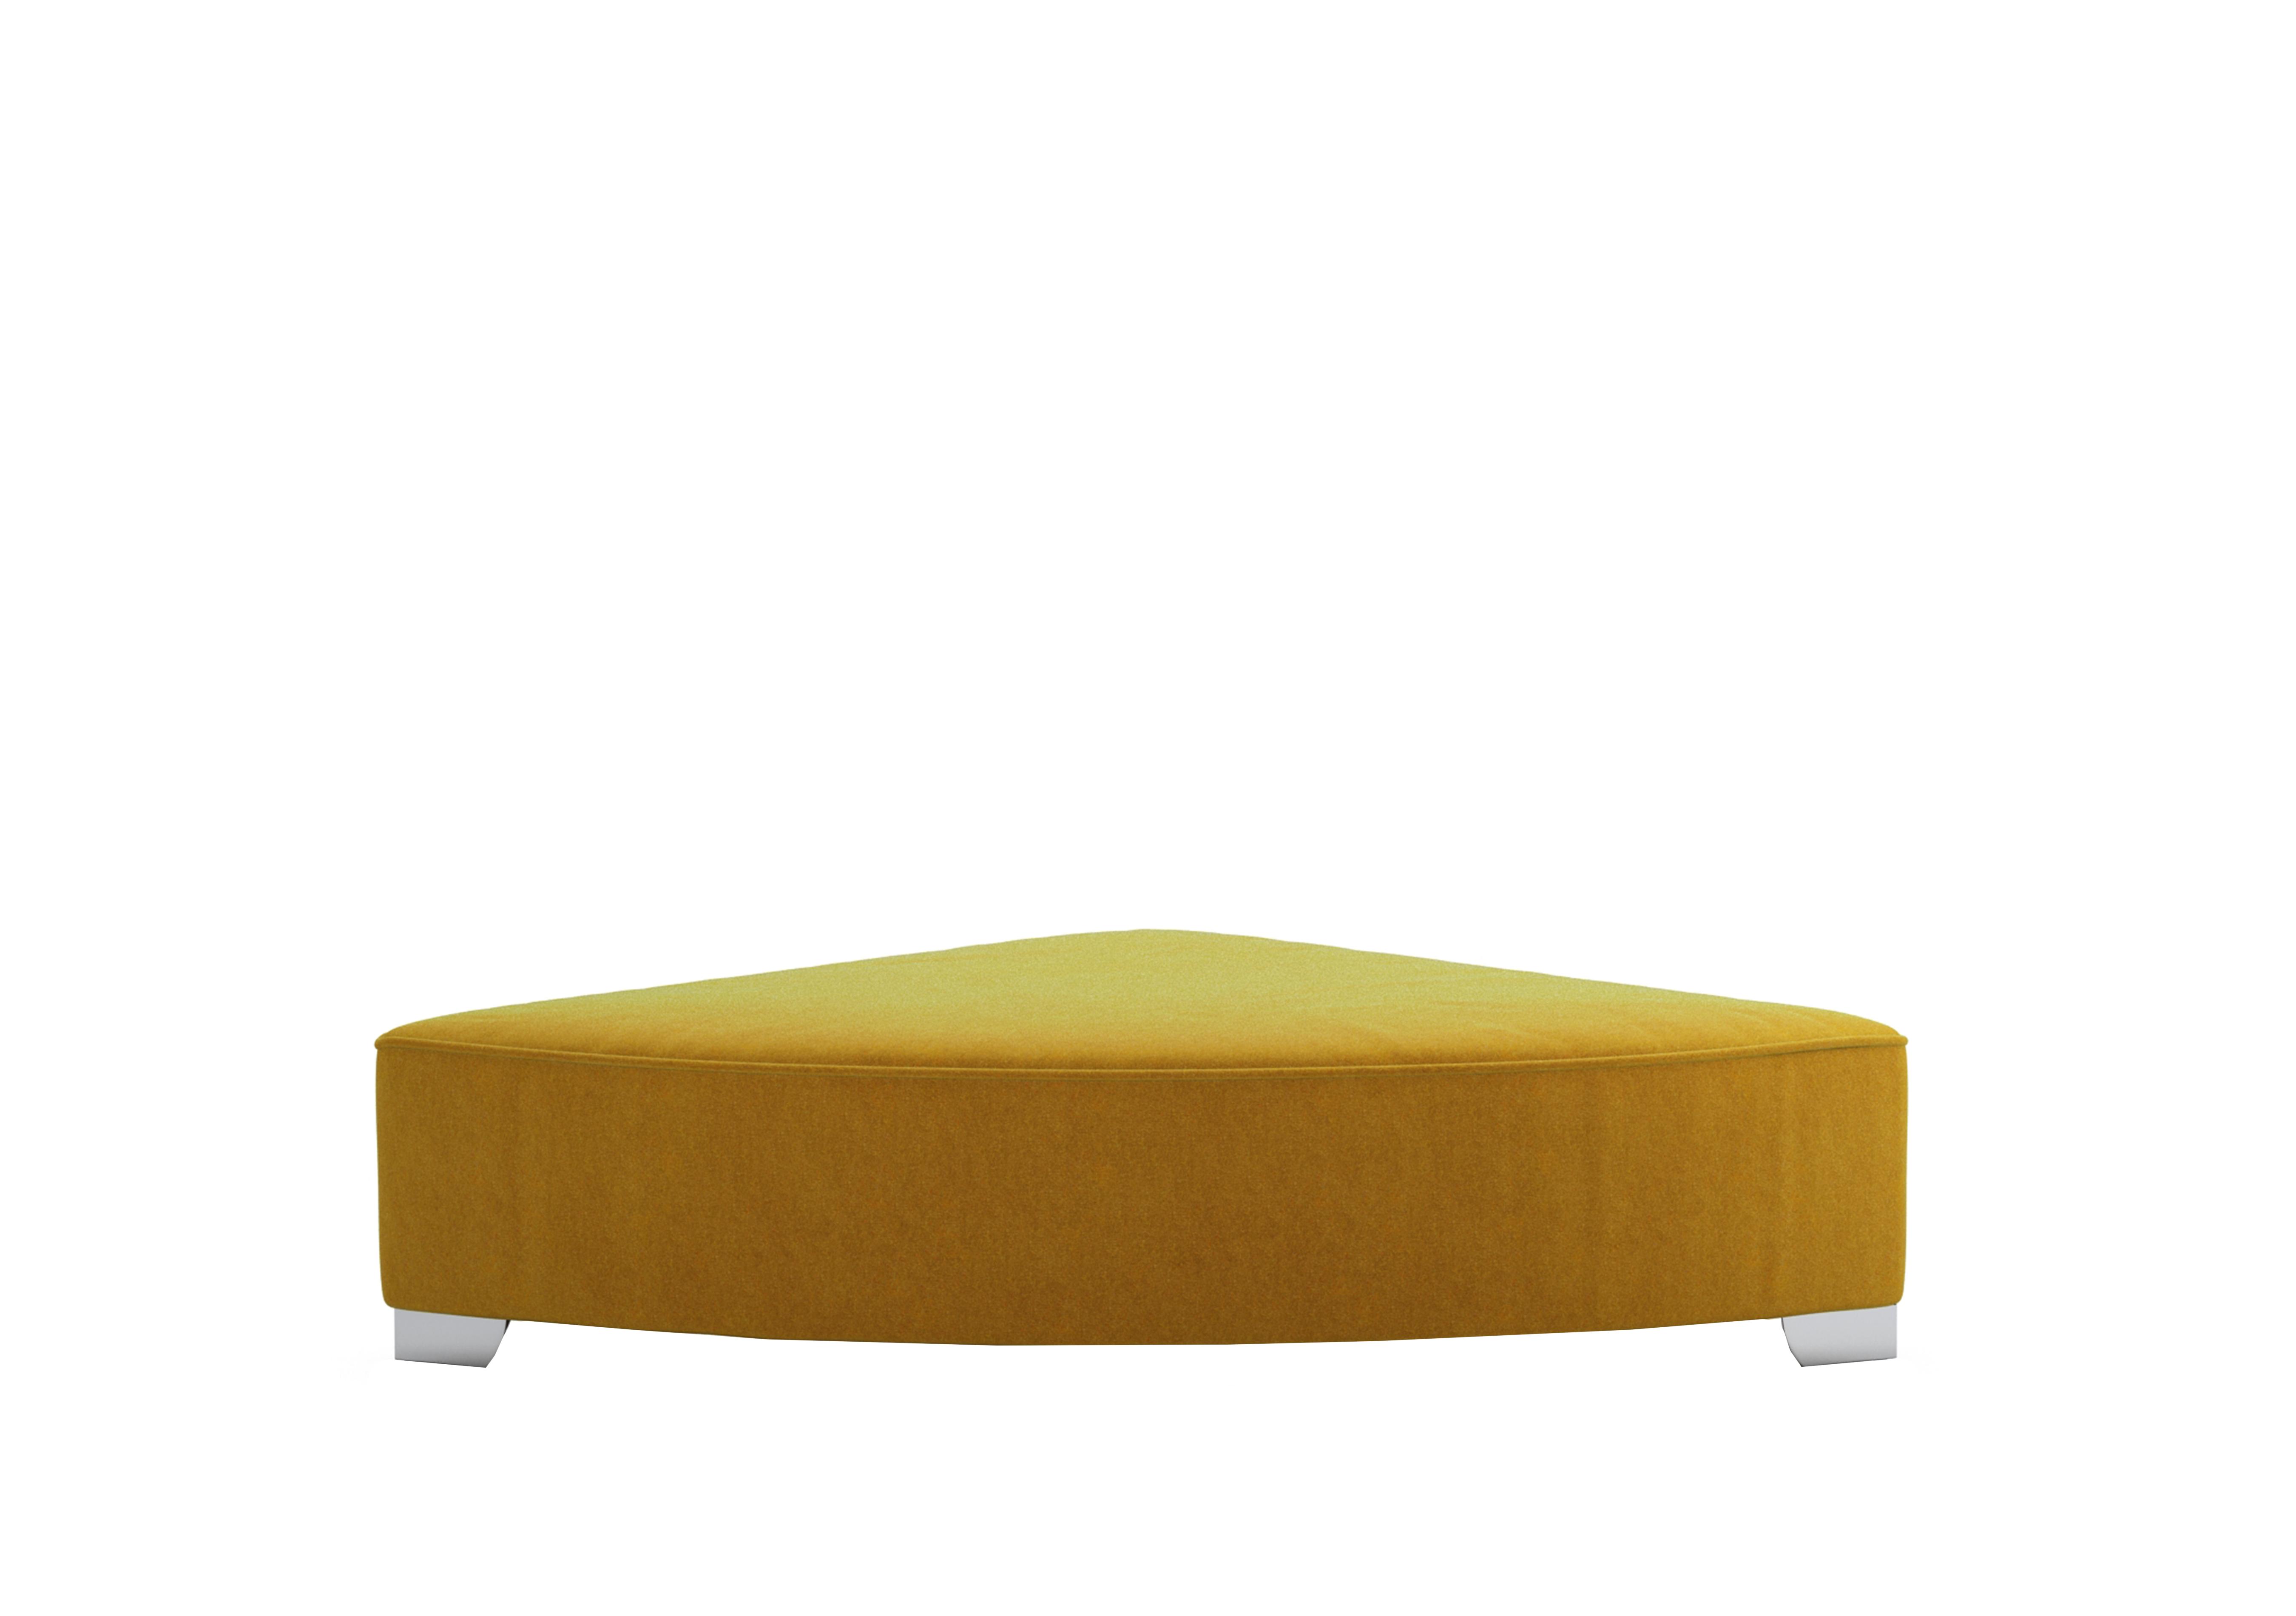 Isobel Fabric Wedge Footstool in Gol204 Golden Spice Ch Ft on Furniture Village